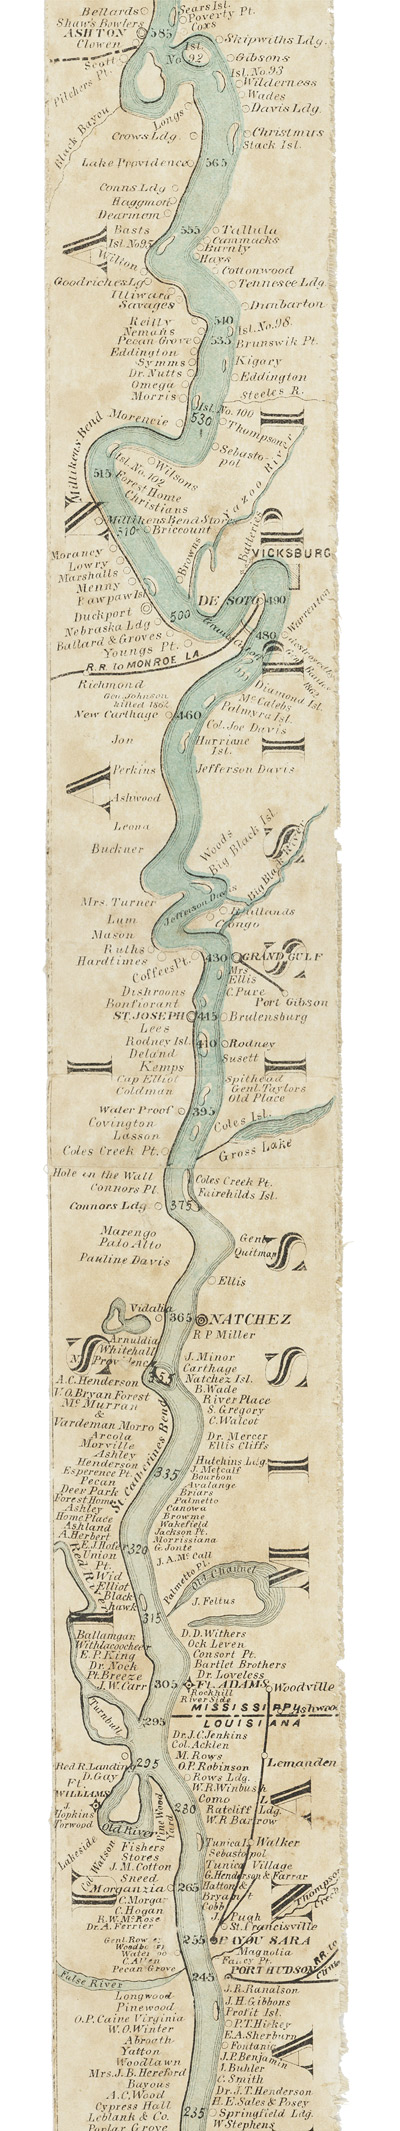 Ribbon map of the Father of Waters